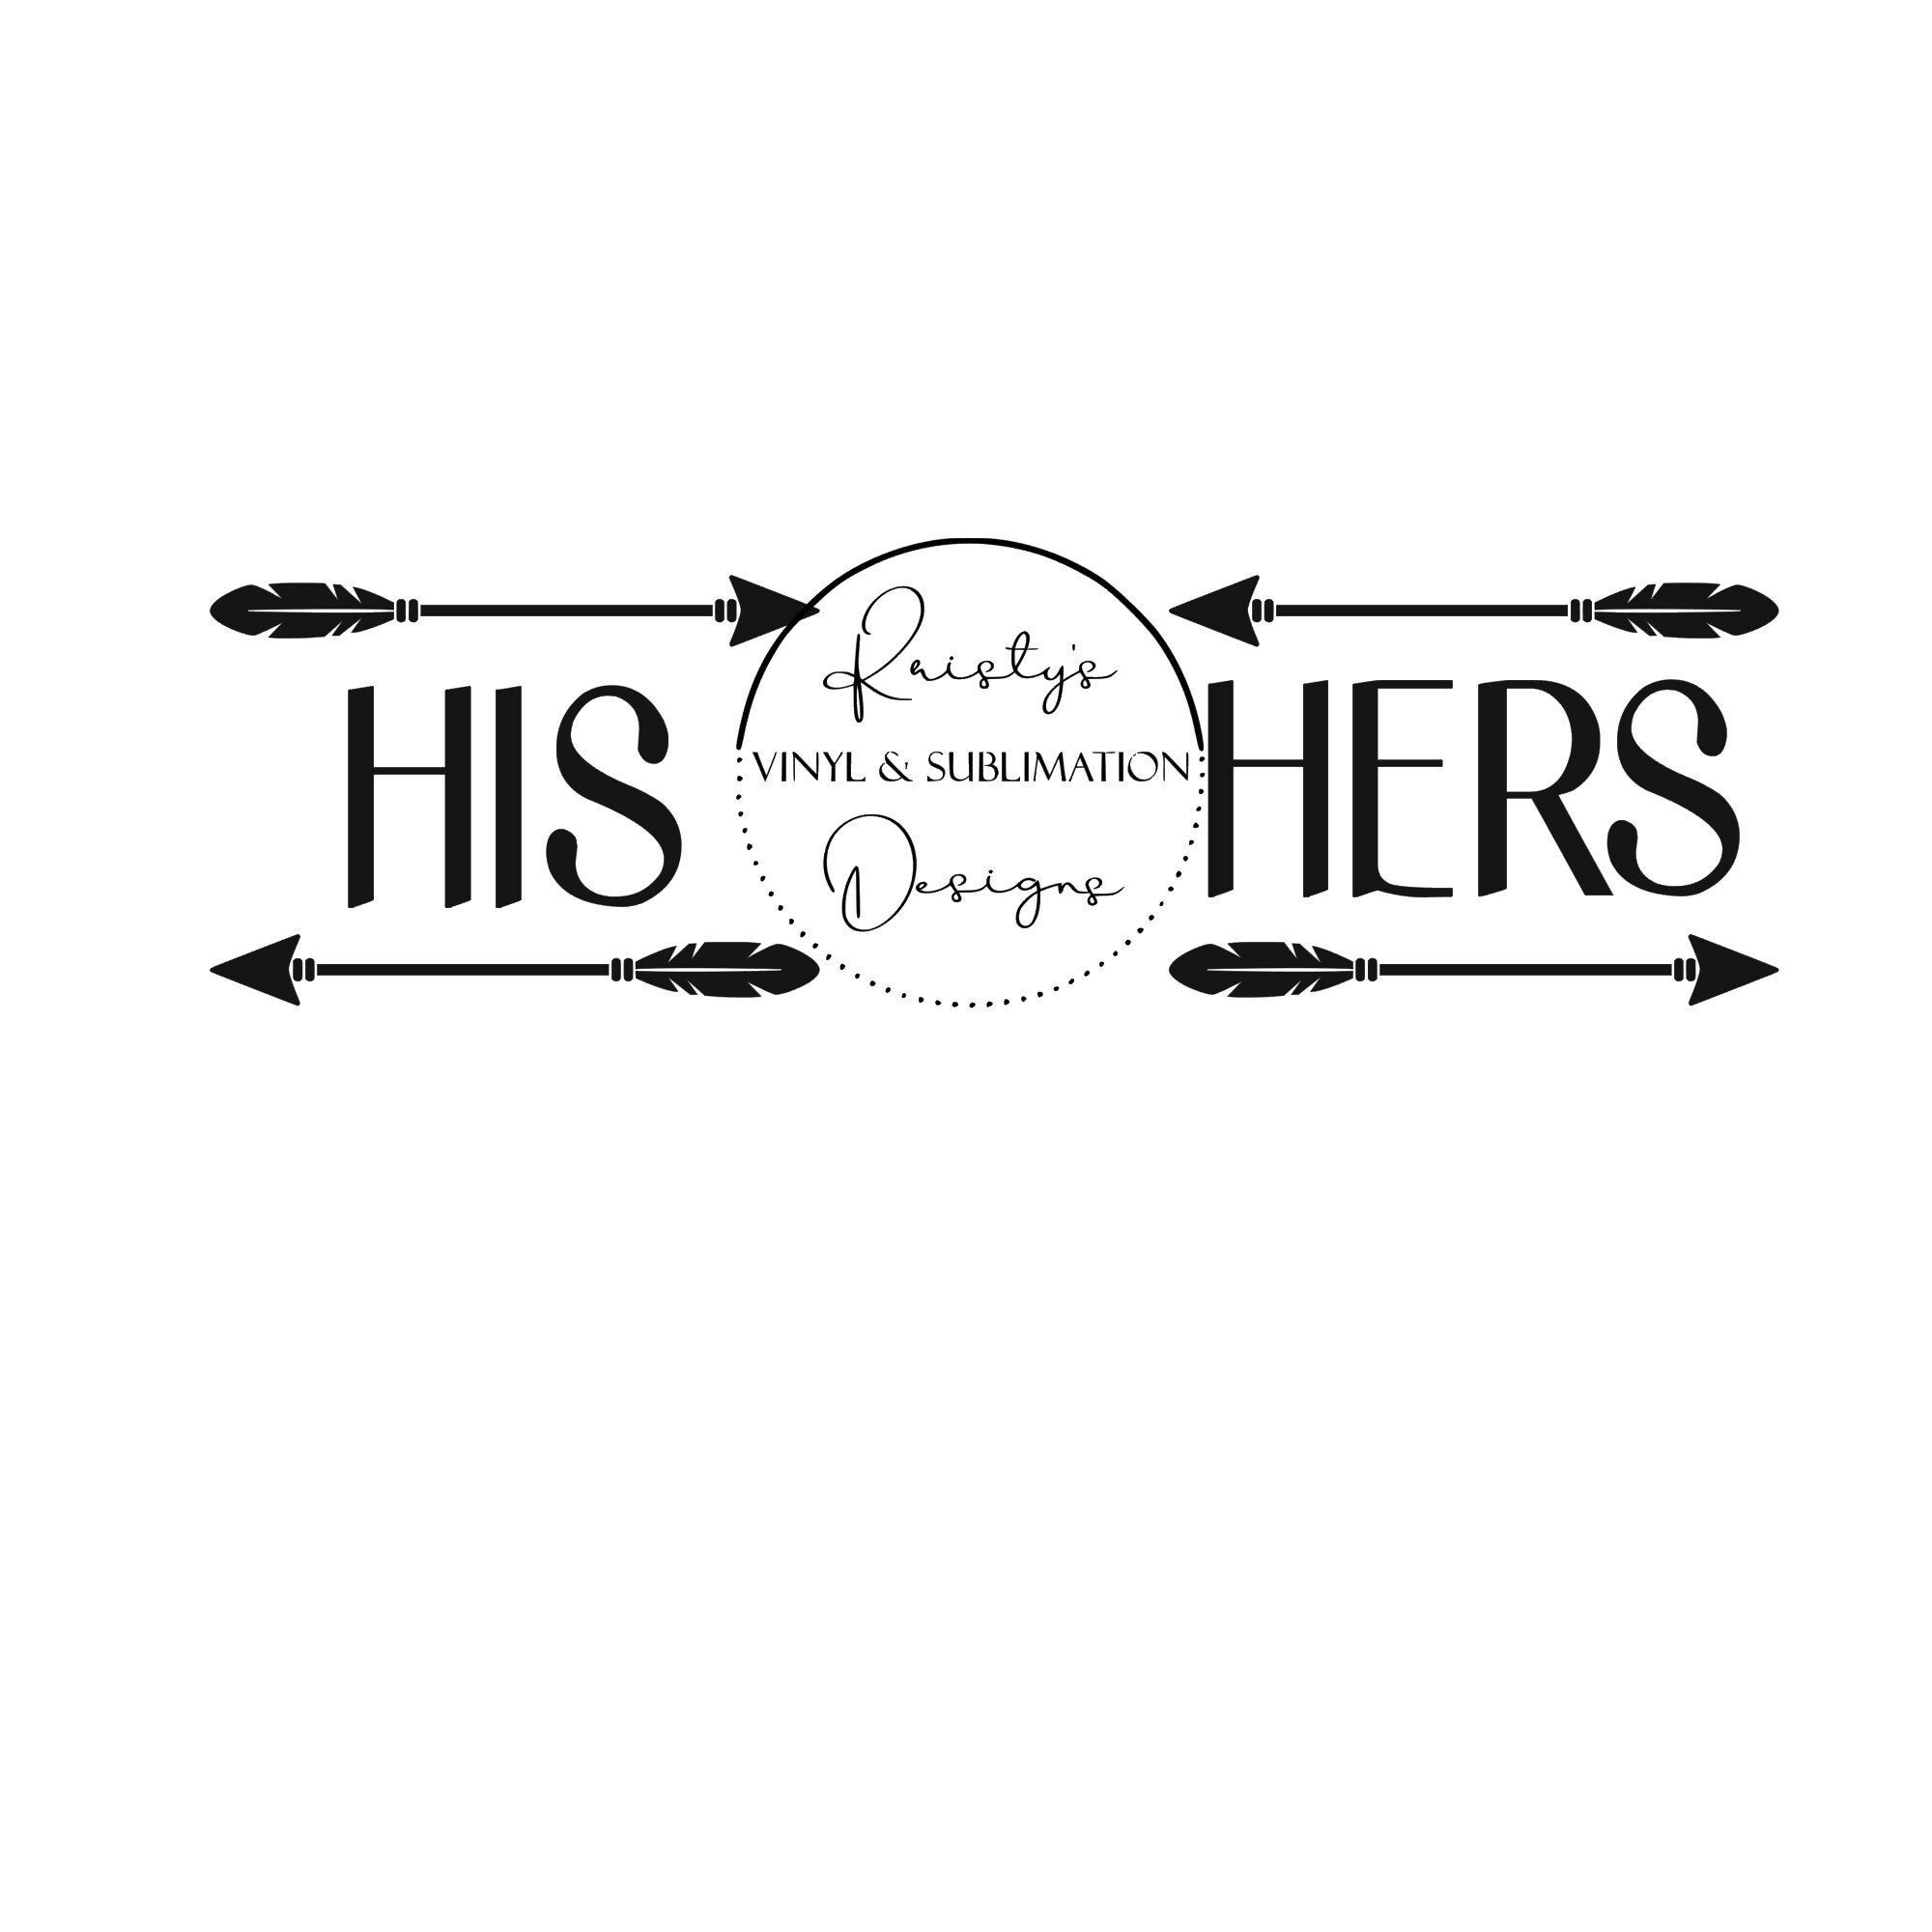 His & Hers Png | His and Hers Svg | His and Hers Designs | Couple Svg |  Couple Png | Digital Download For Cricut, Silhouette | For T-Shirts